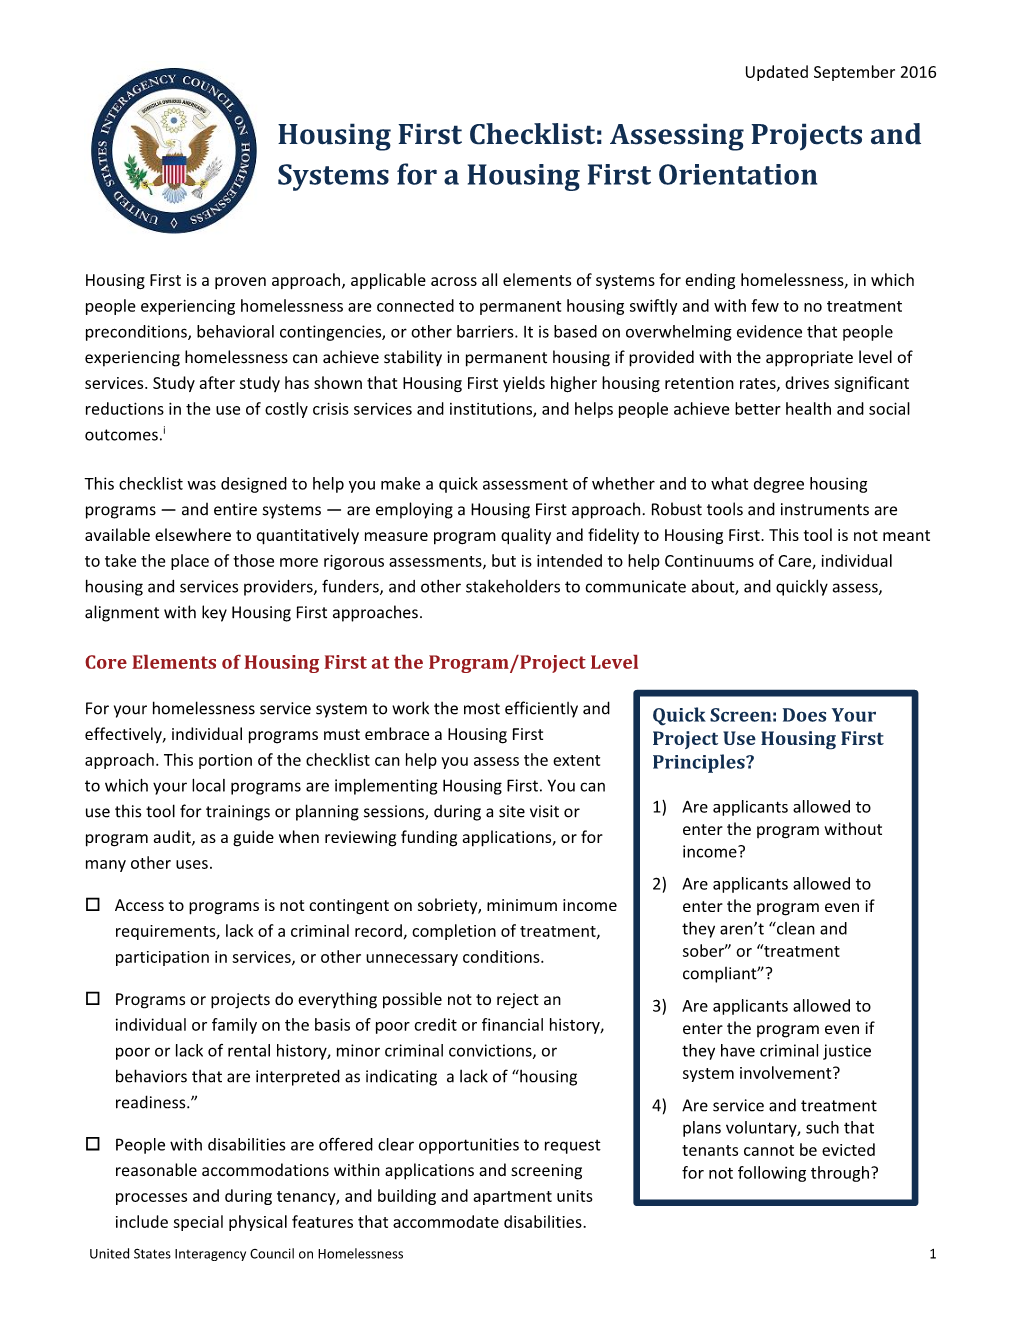 Housing First Checklist: Assessing Projects and Systems for a Housing First Orientation